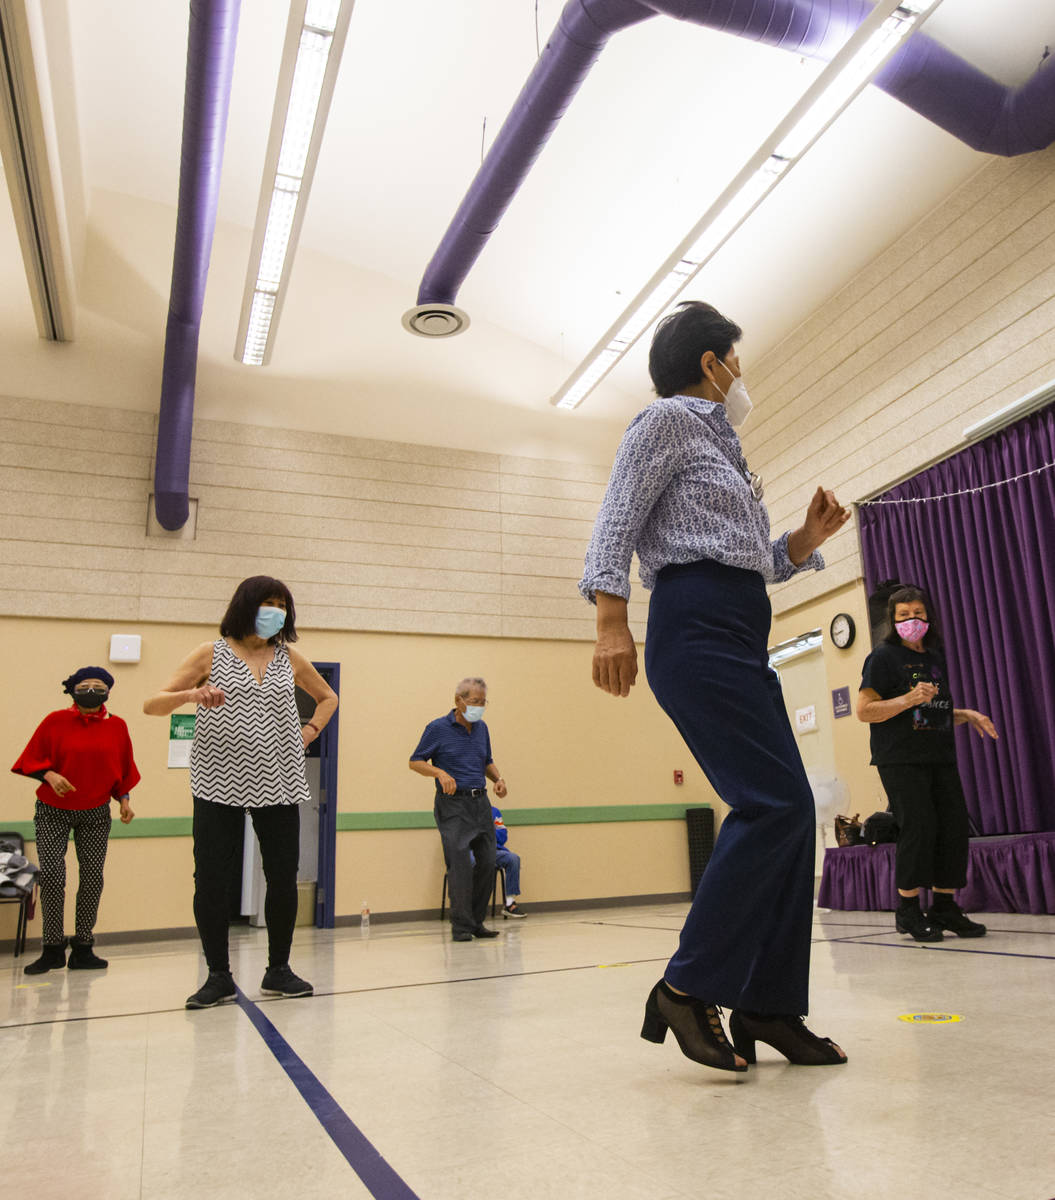 May San Carment, 73, right, participates during a line dancing class at the West Flamingo Senio ...